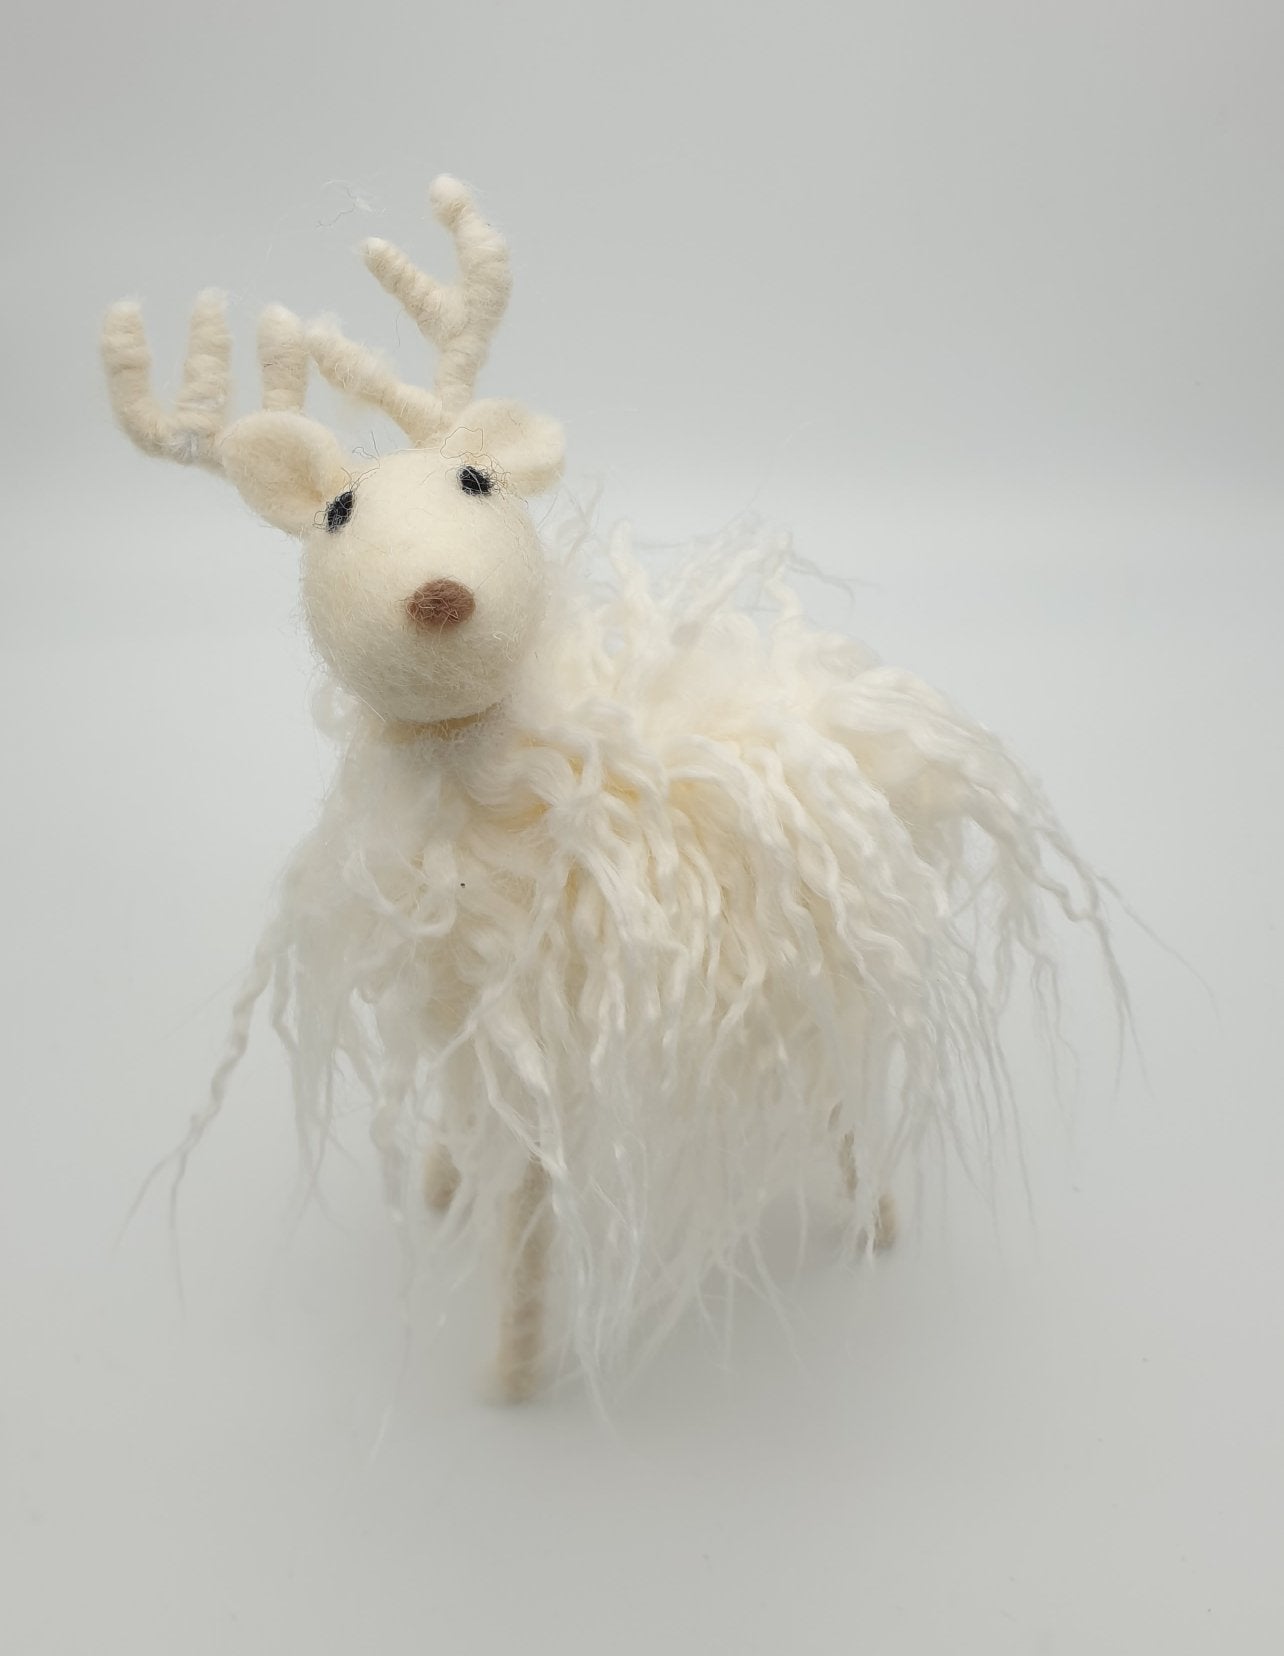 Felt Reindeer with Wooly Coat - small